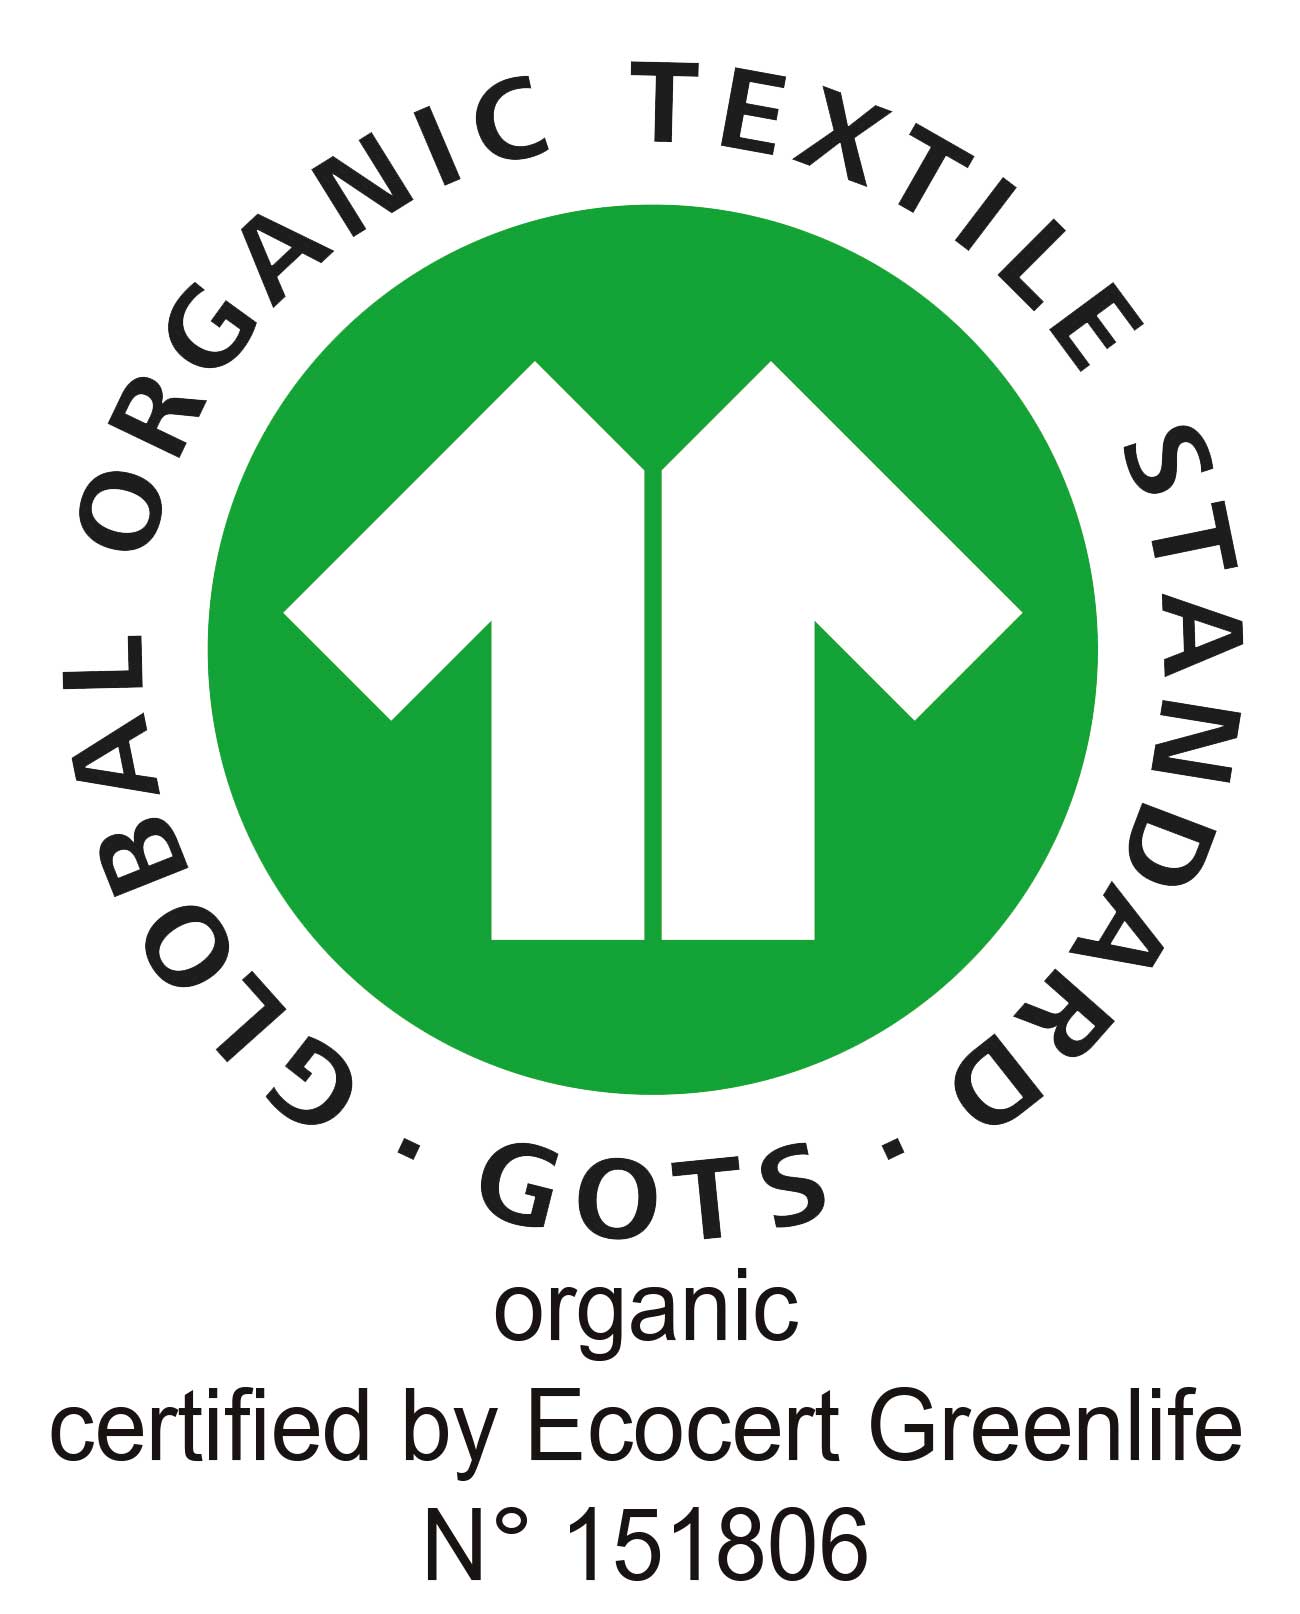 organic certified by Ecocert Greenlife N° 151806